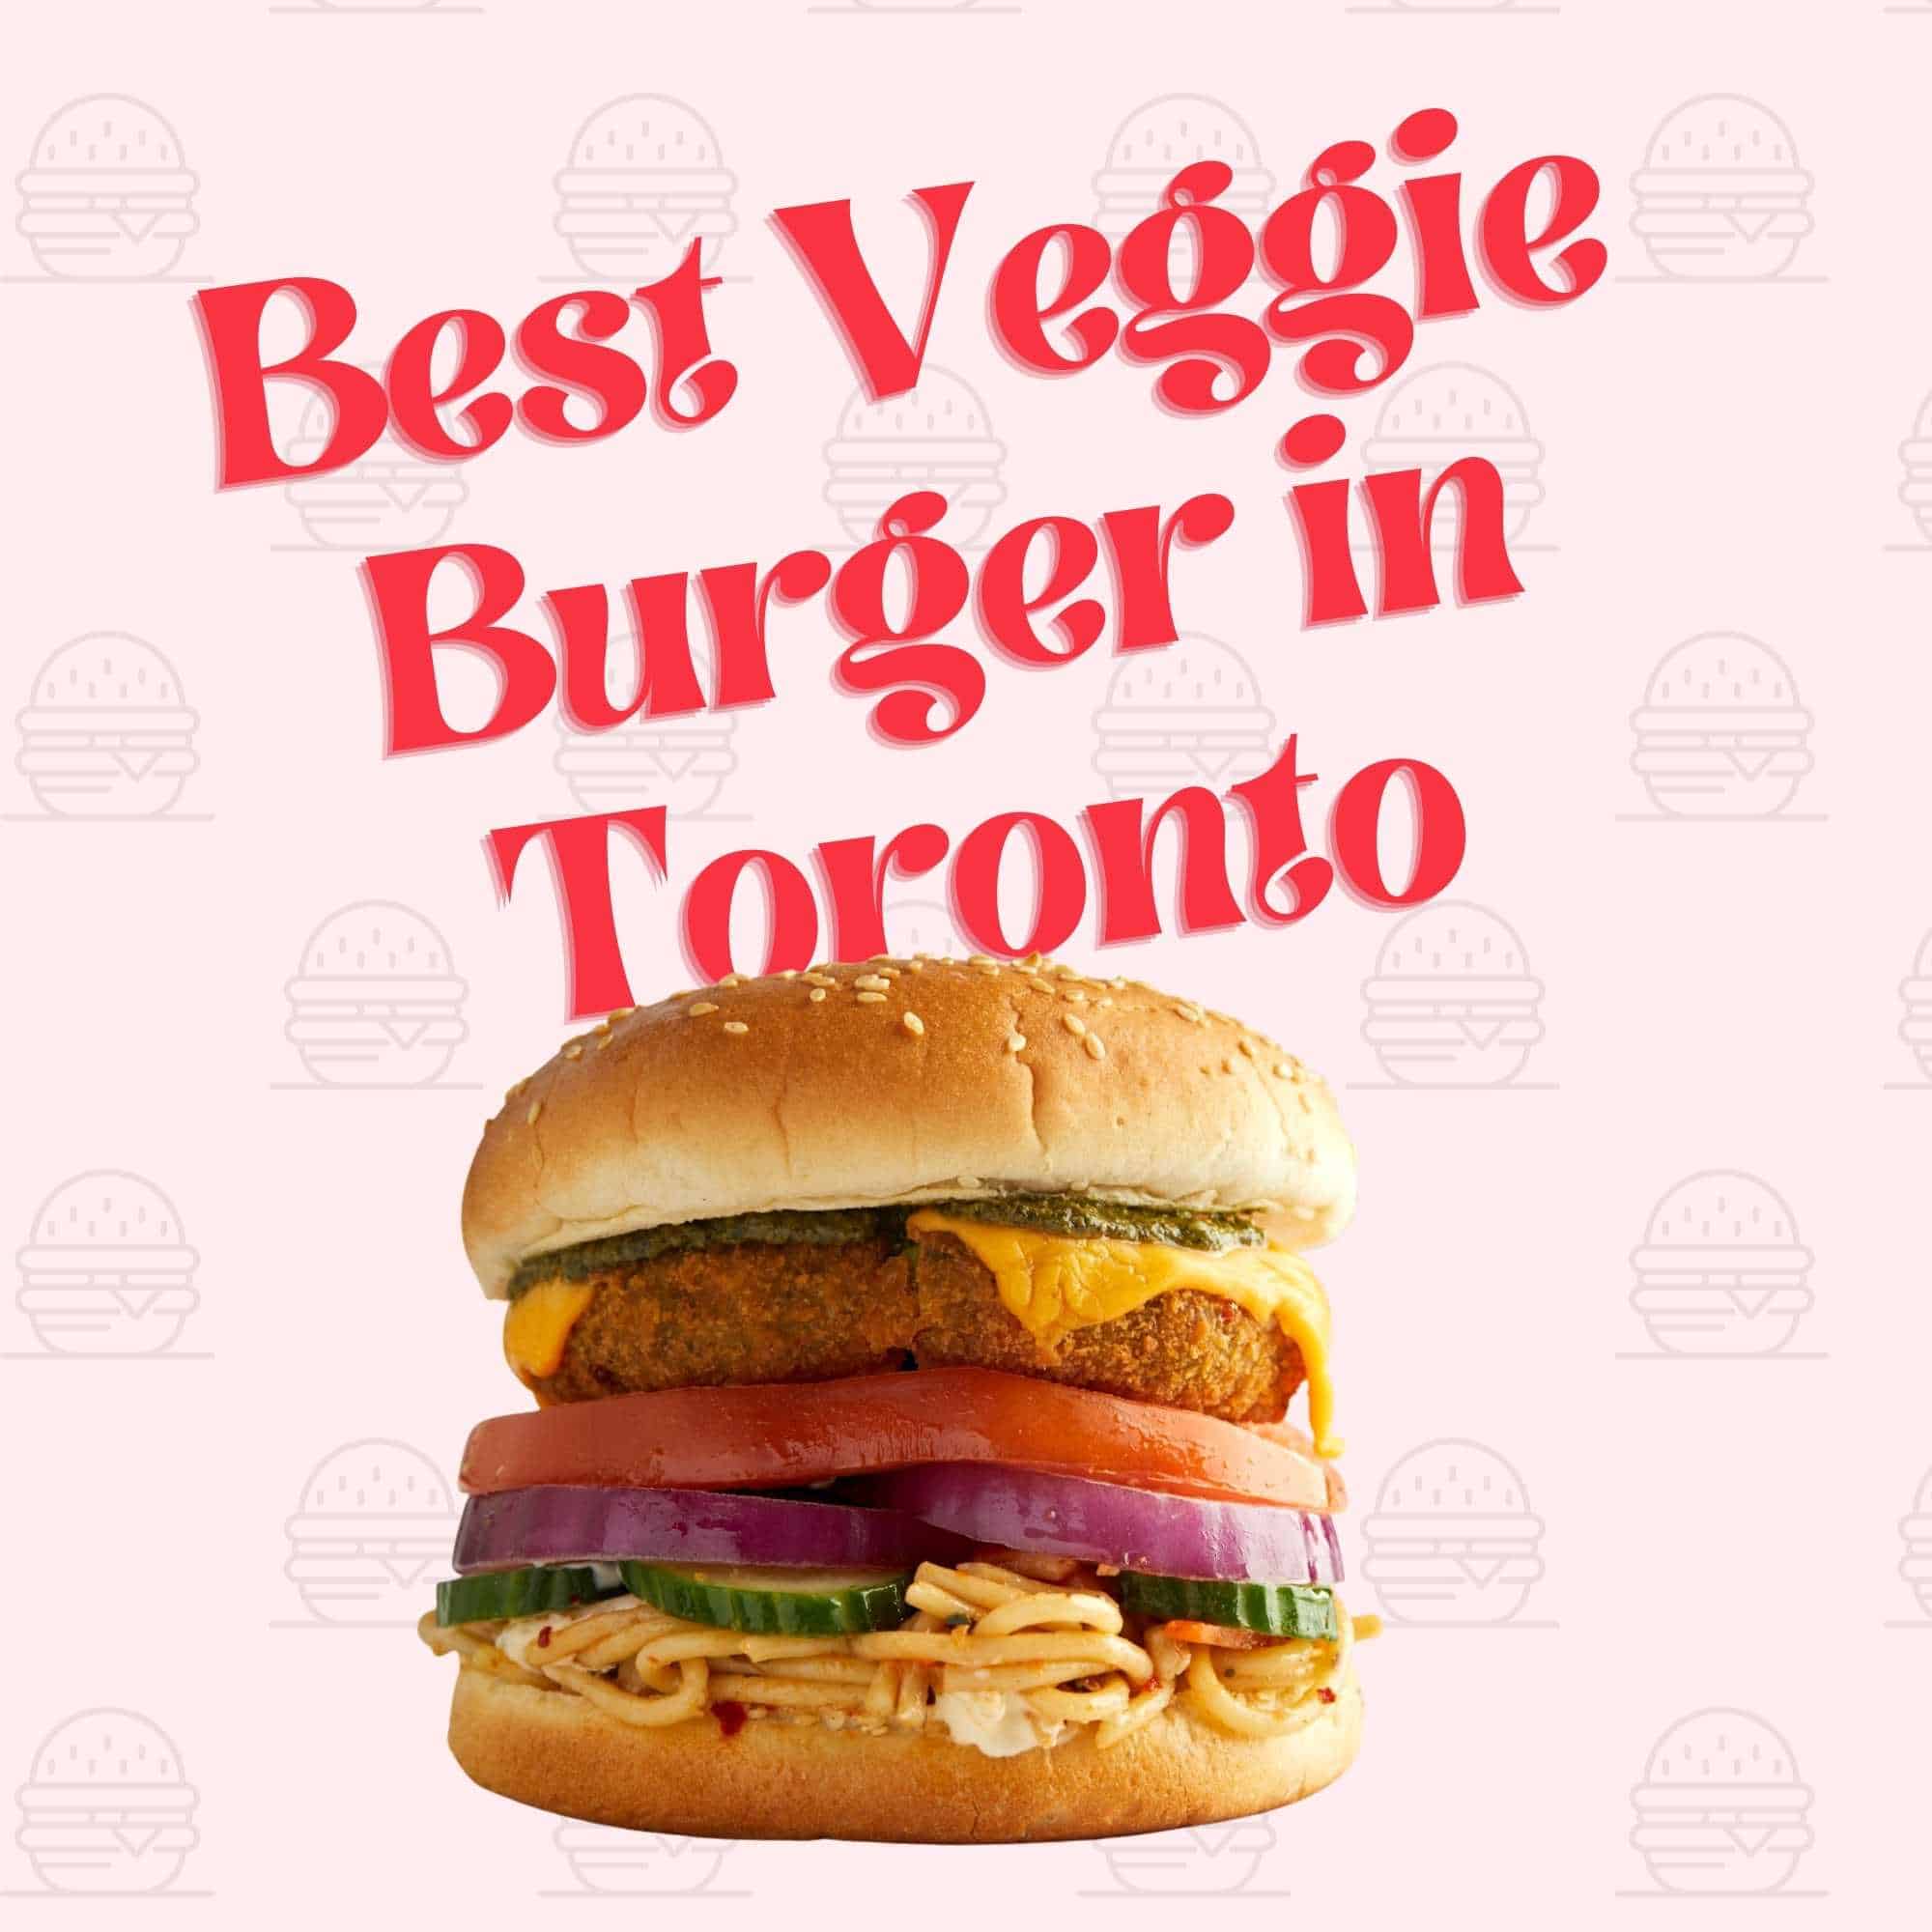 Vegetarian Pizza Is Better – Try the Best Vege Pizza in Toronto